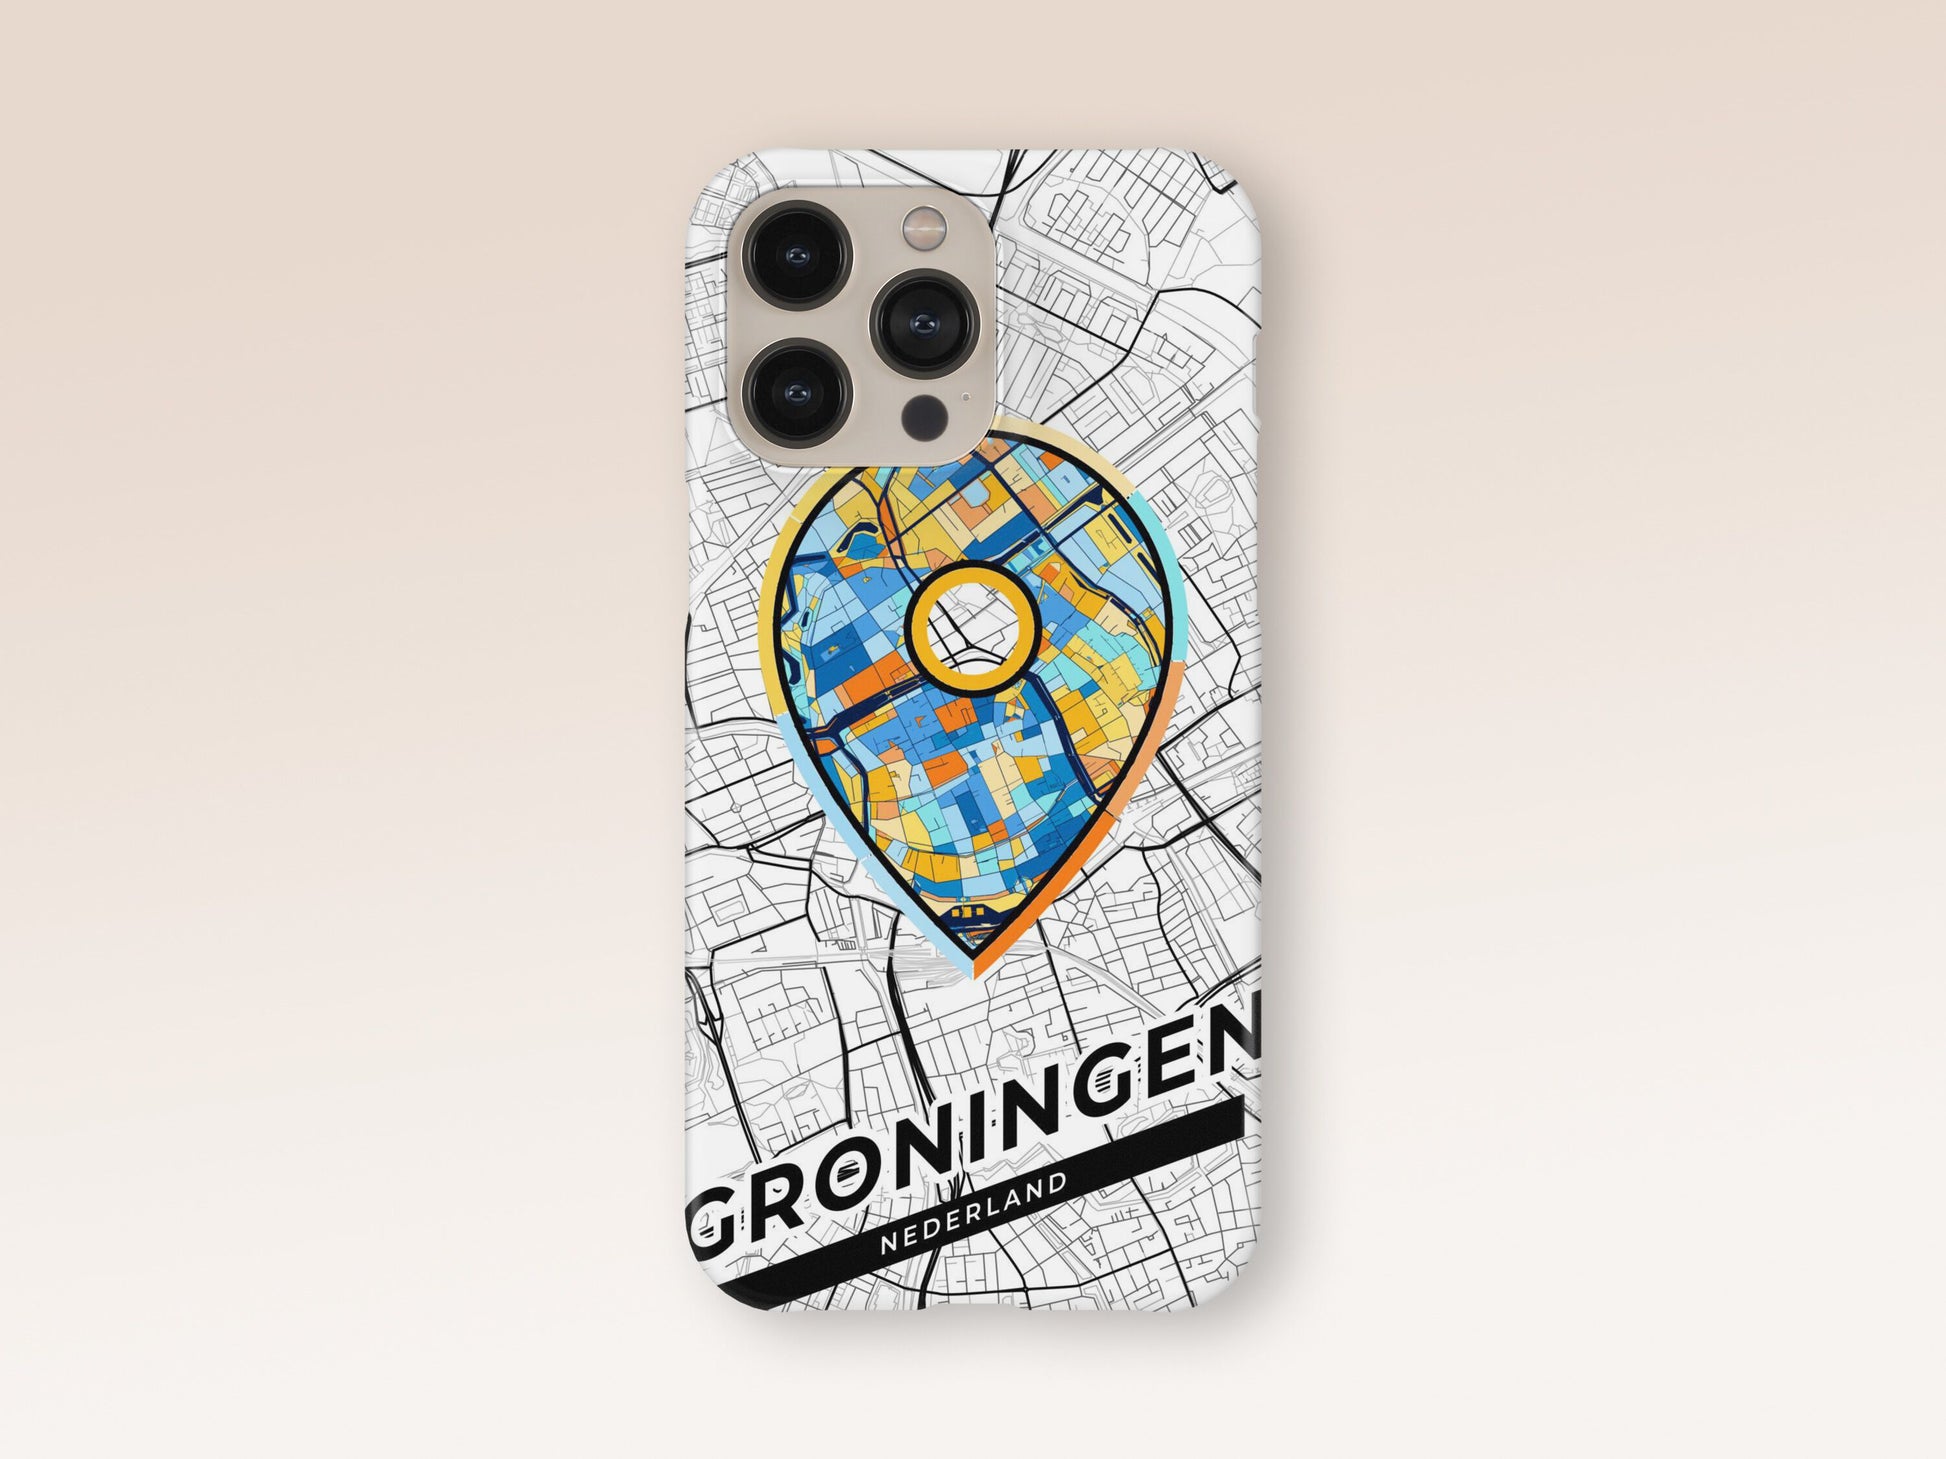 Groningen Netherlands slim phone case with colorful icon. Birthday, wedding or housewarming gift. Couple match cases. 1